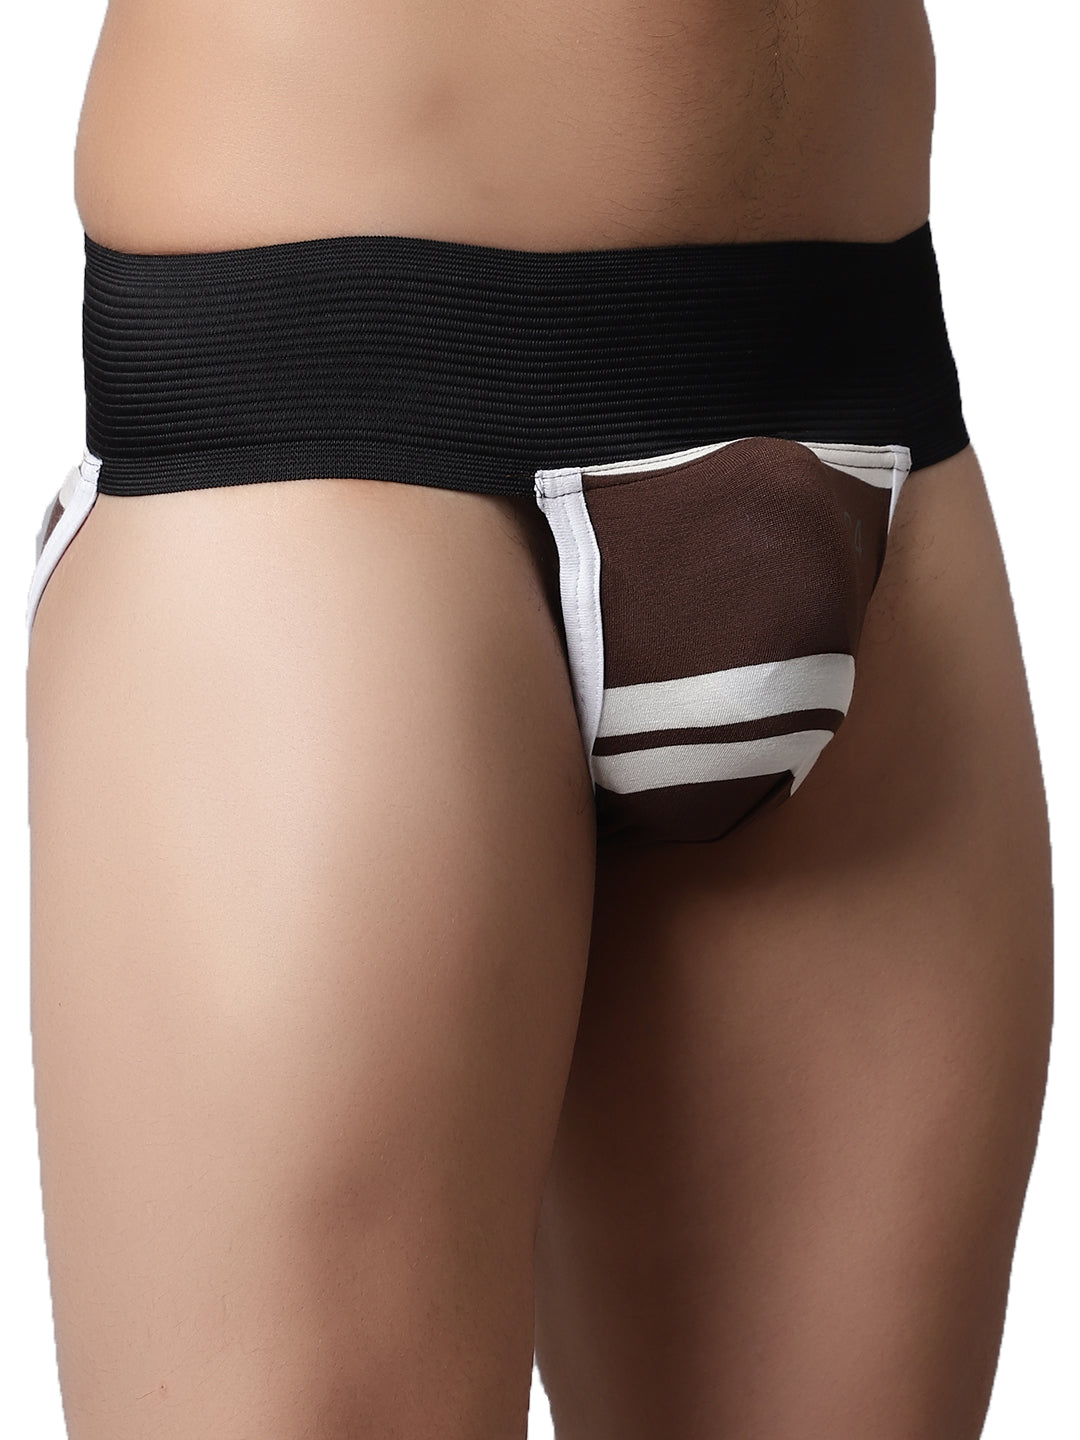 IC4 Men's stripe Gym Supporter Combo Pack of 2 - Brown